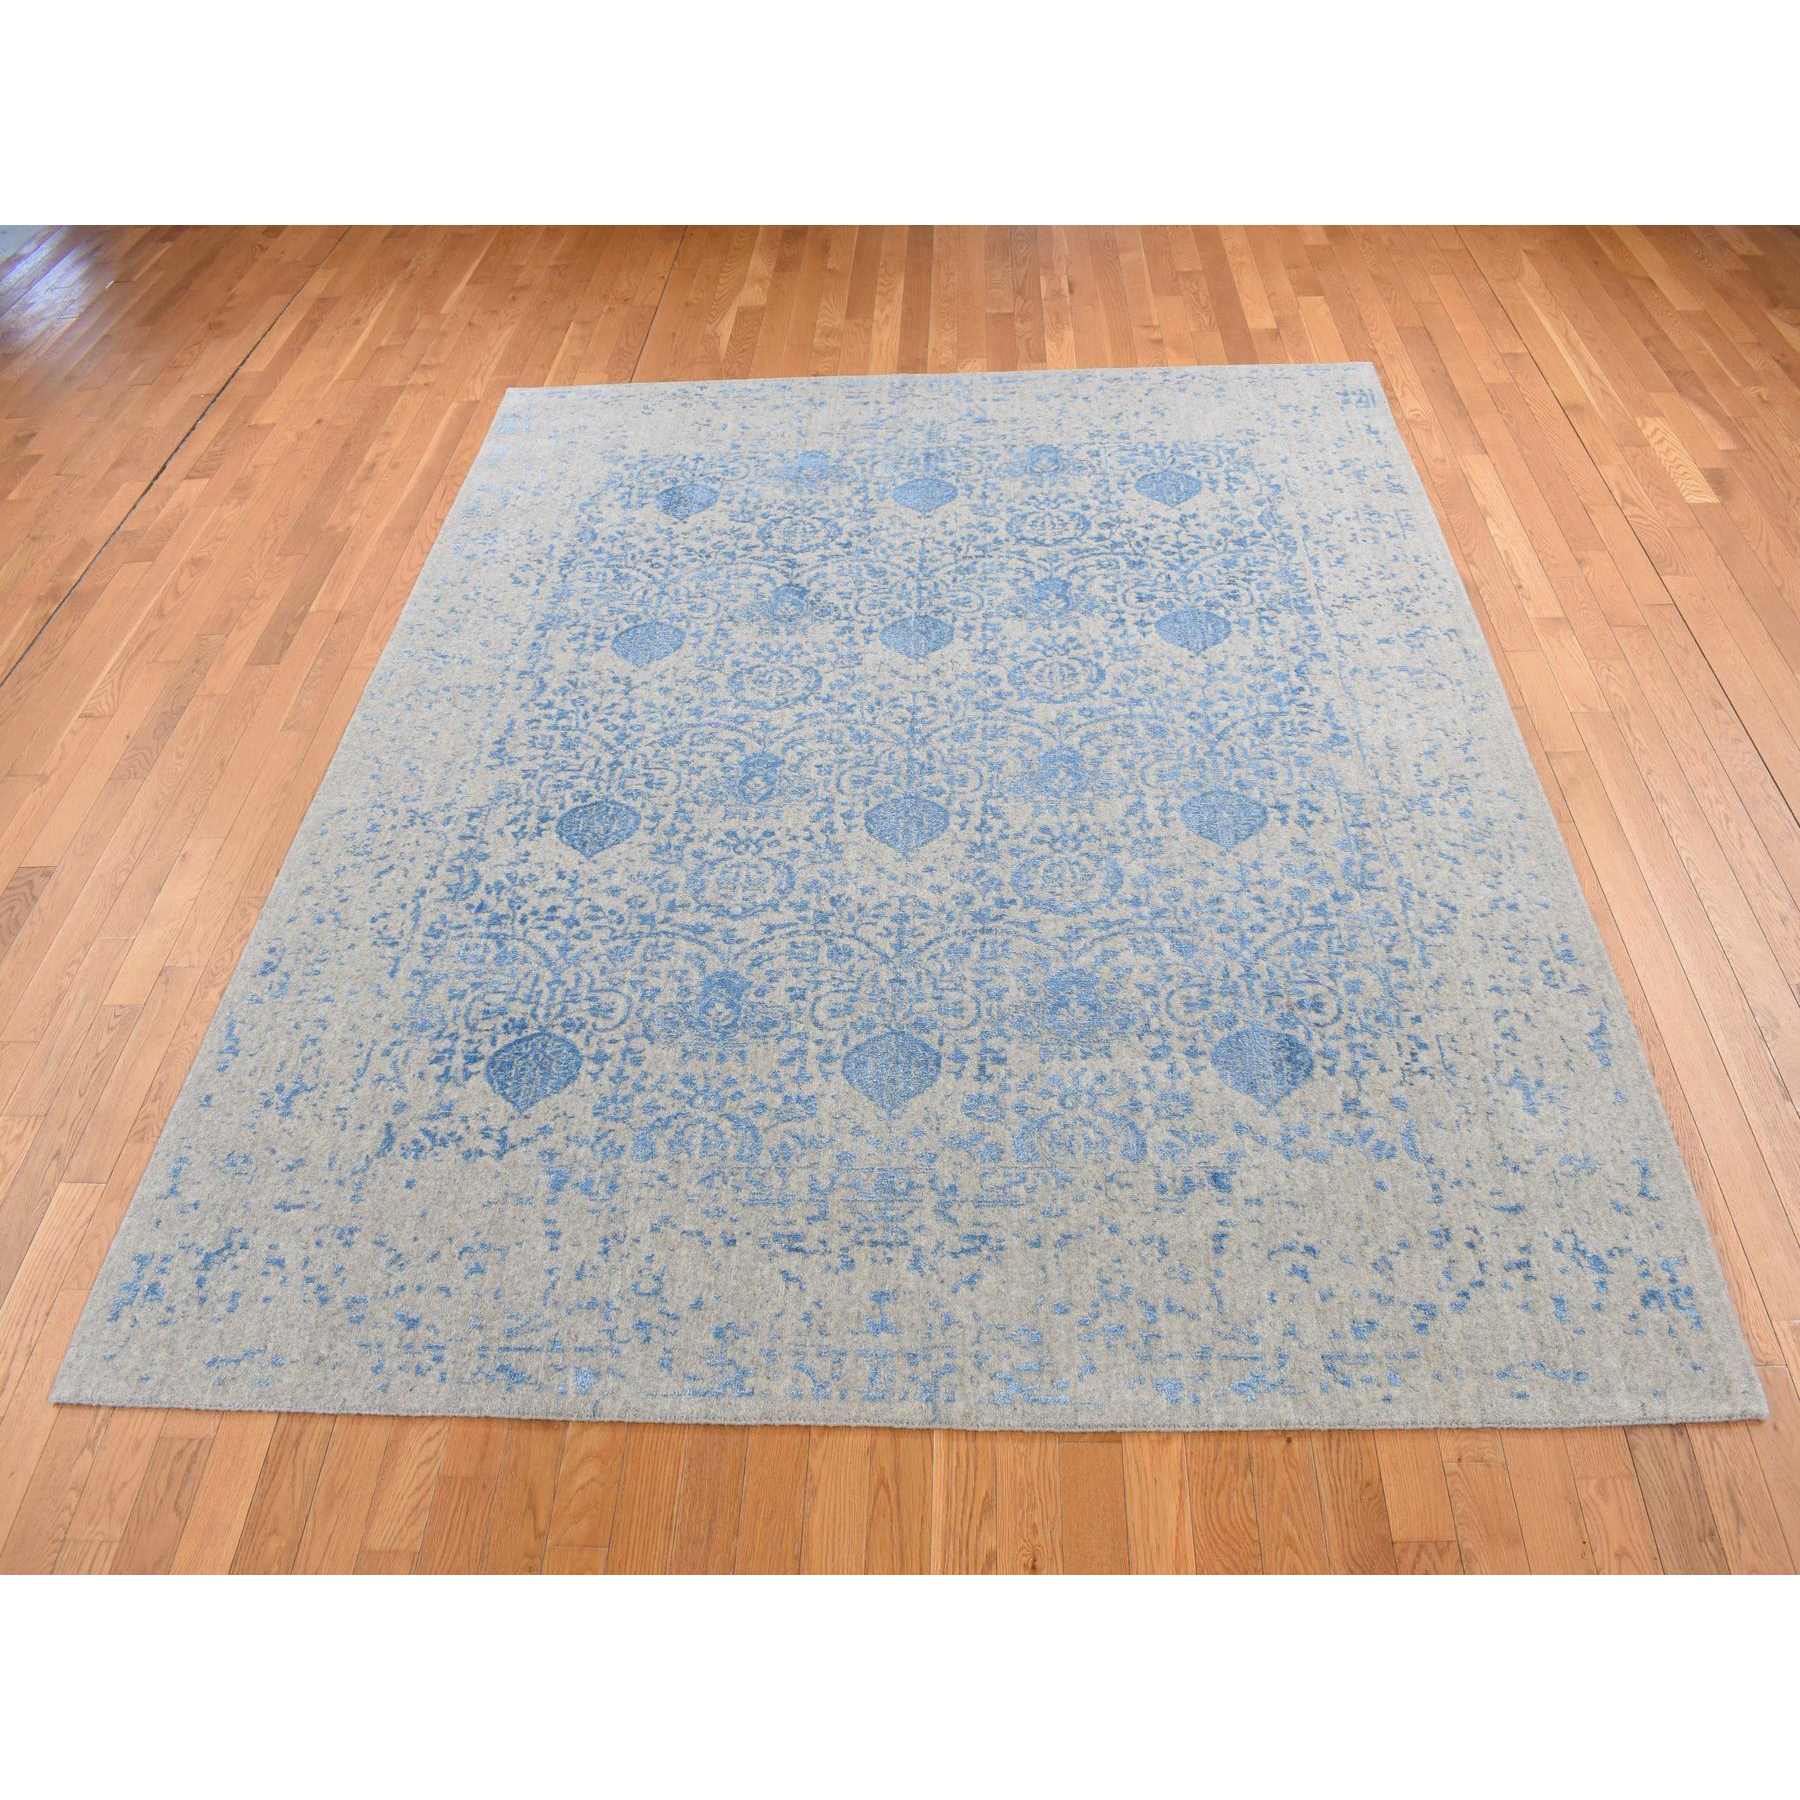 Modern-and-Contemporary-Hand-Loomed-Rug-435290